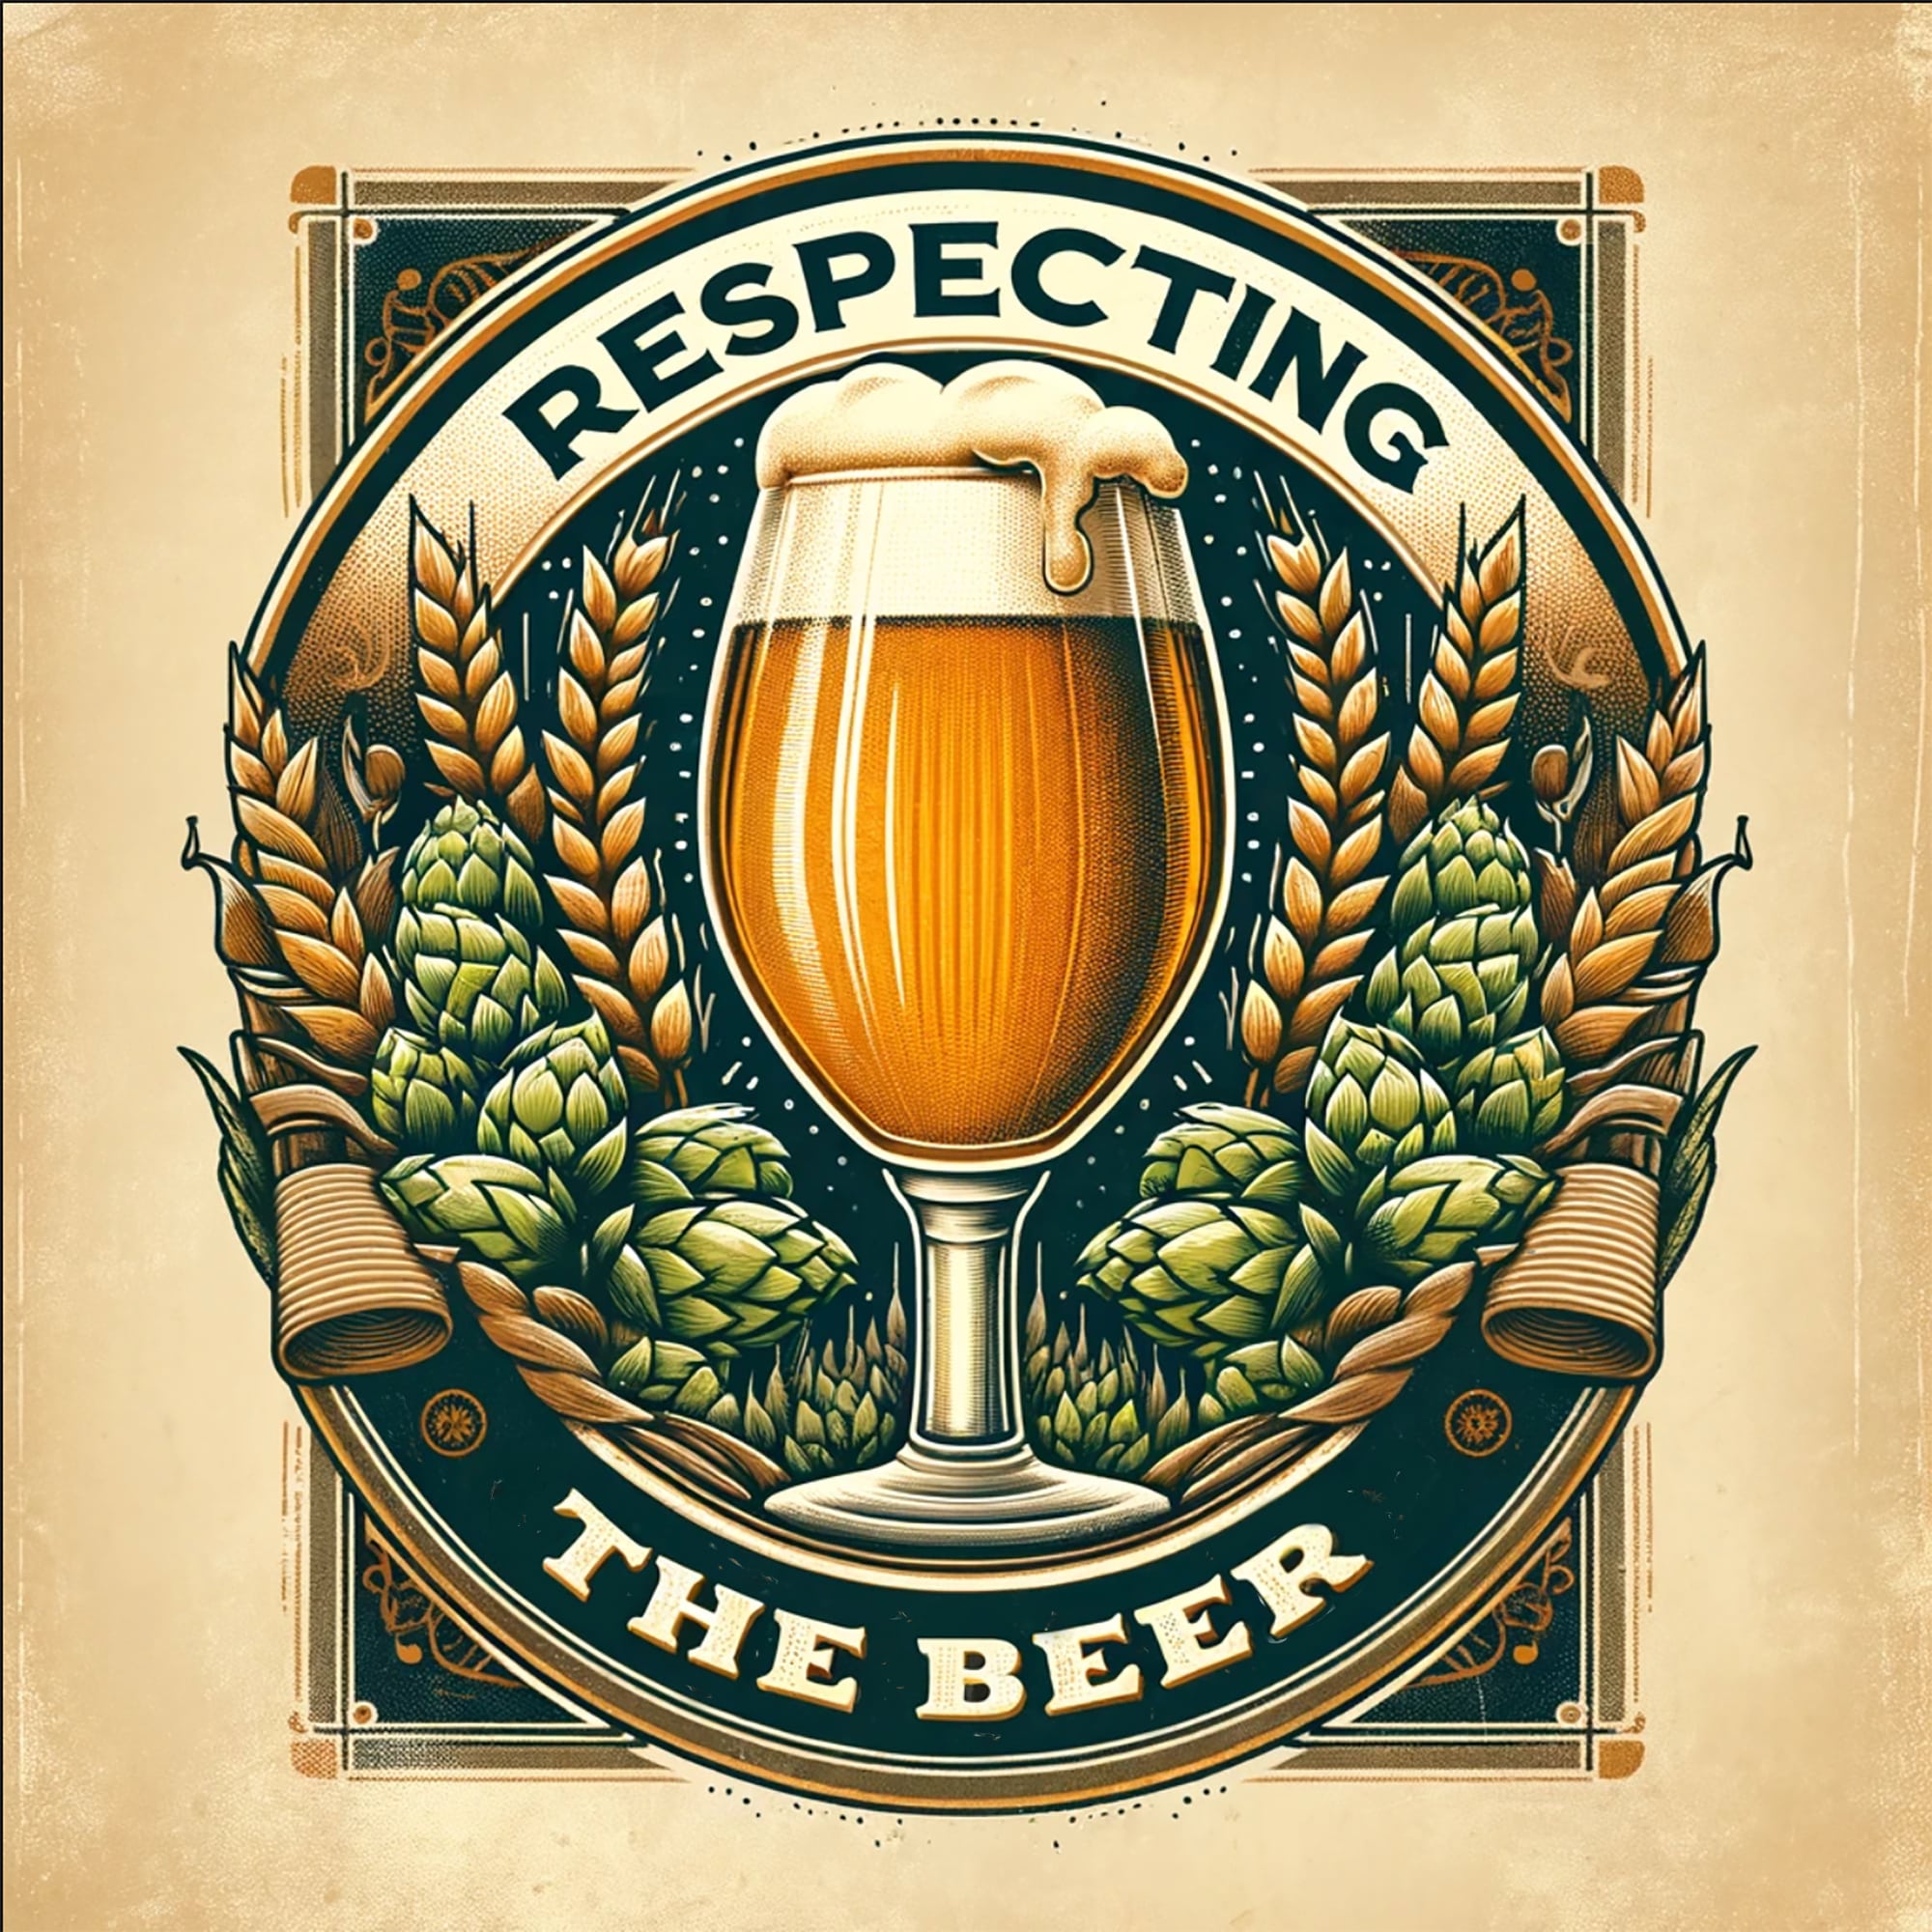 Show artwork for Respecting the Beer